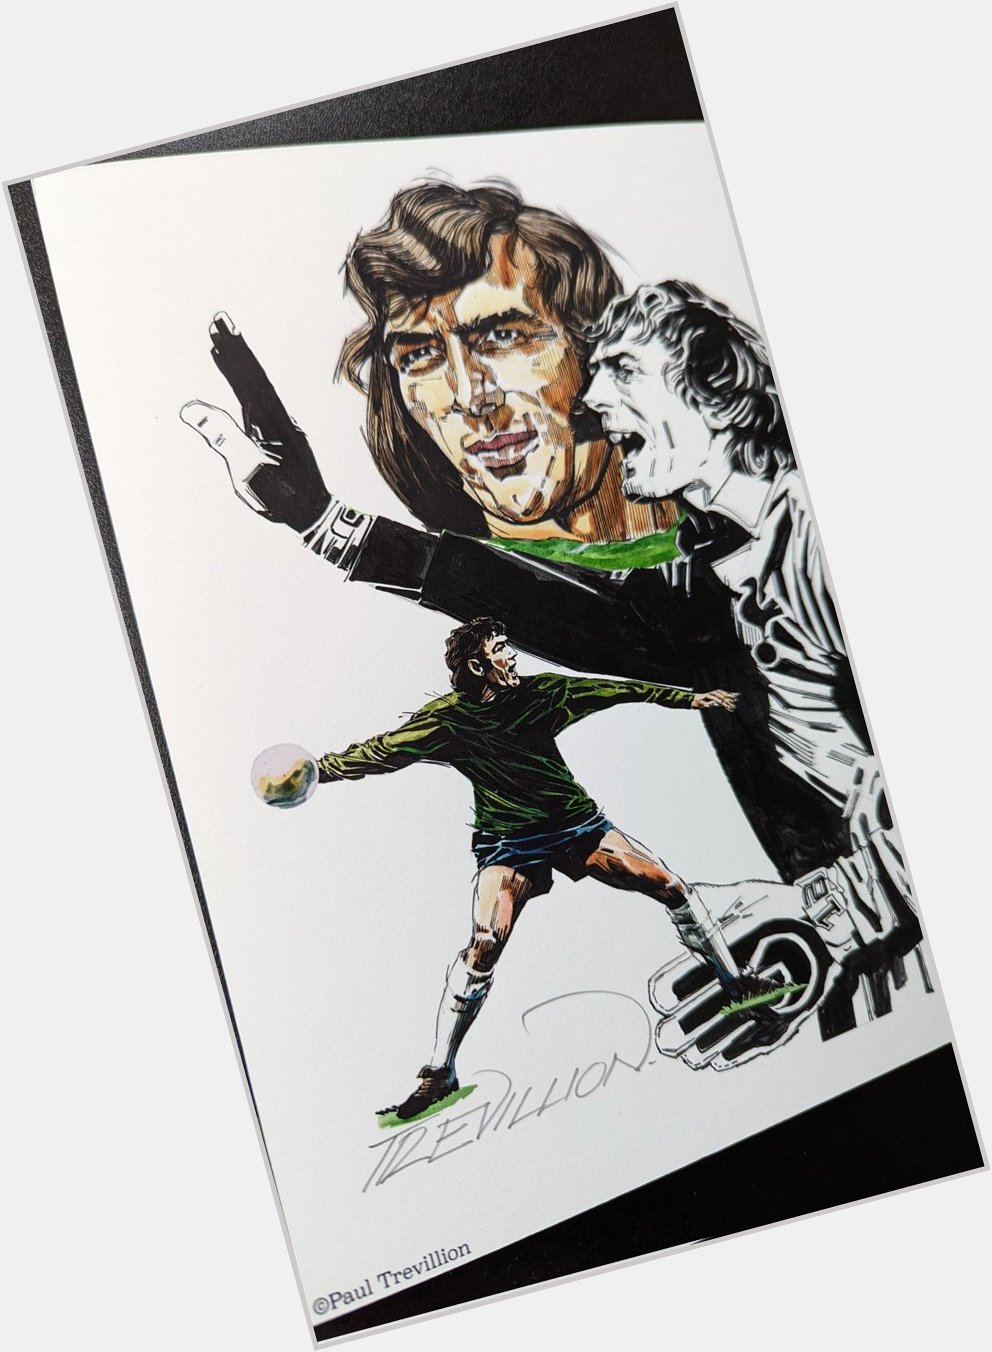 Happy Birthday to PAT JENNINGS  No.1 Tottenham Hotspur & NI goalkeeper legend & one of the nicest guys in football. 